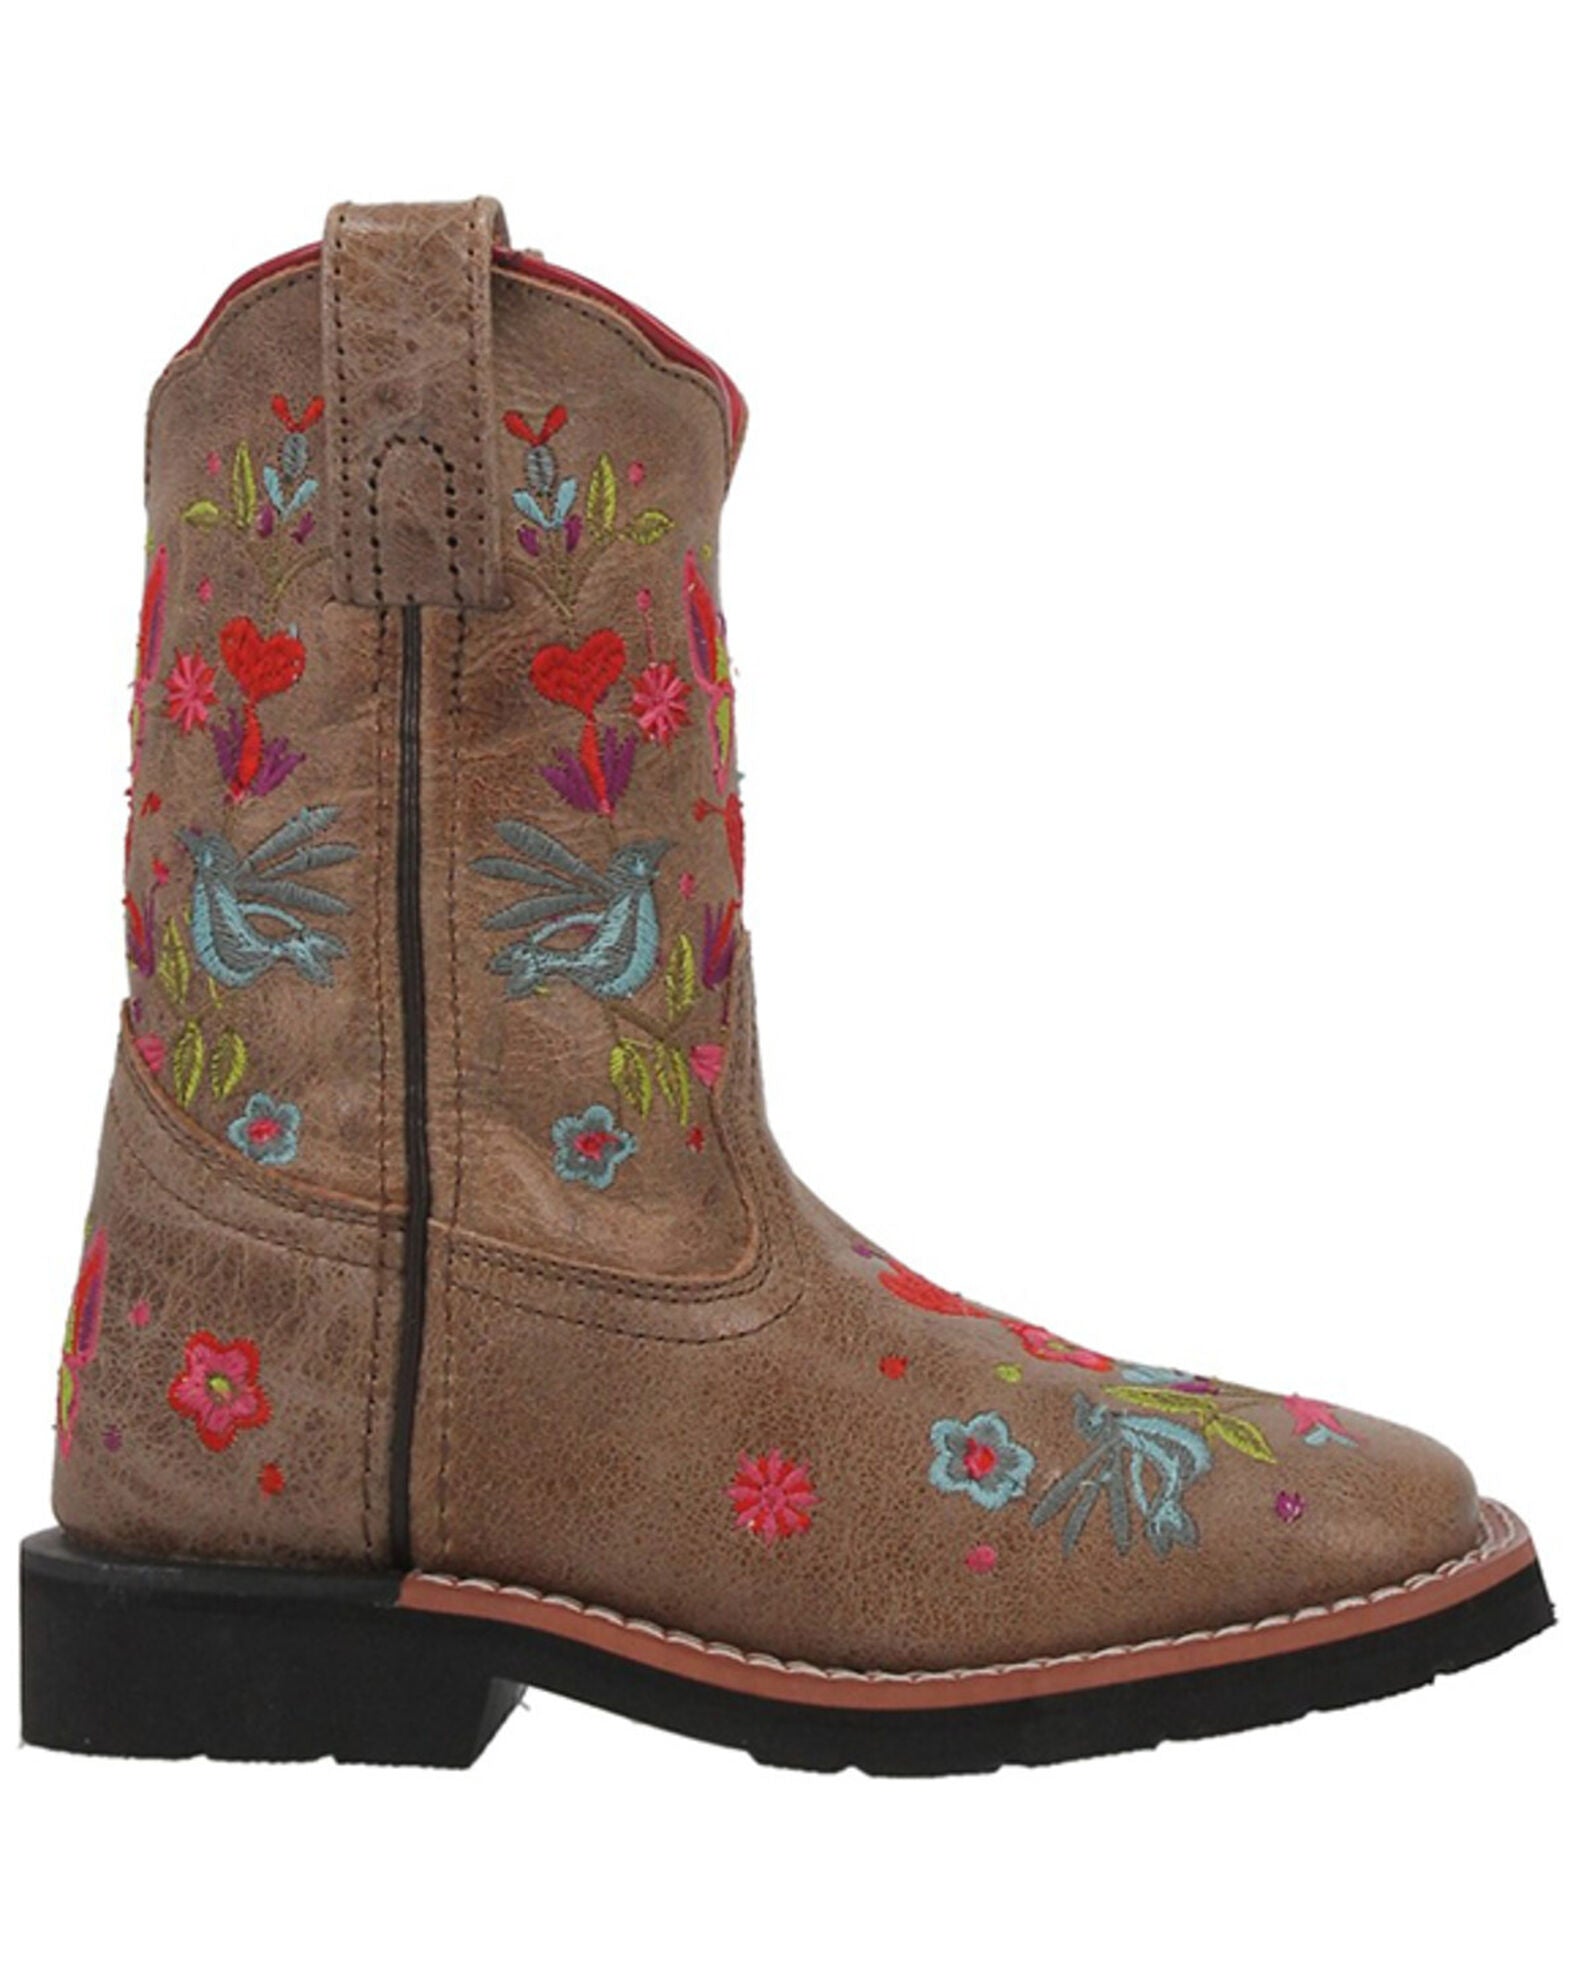 Dan Post Flower Embroidered Leather Children's Boots